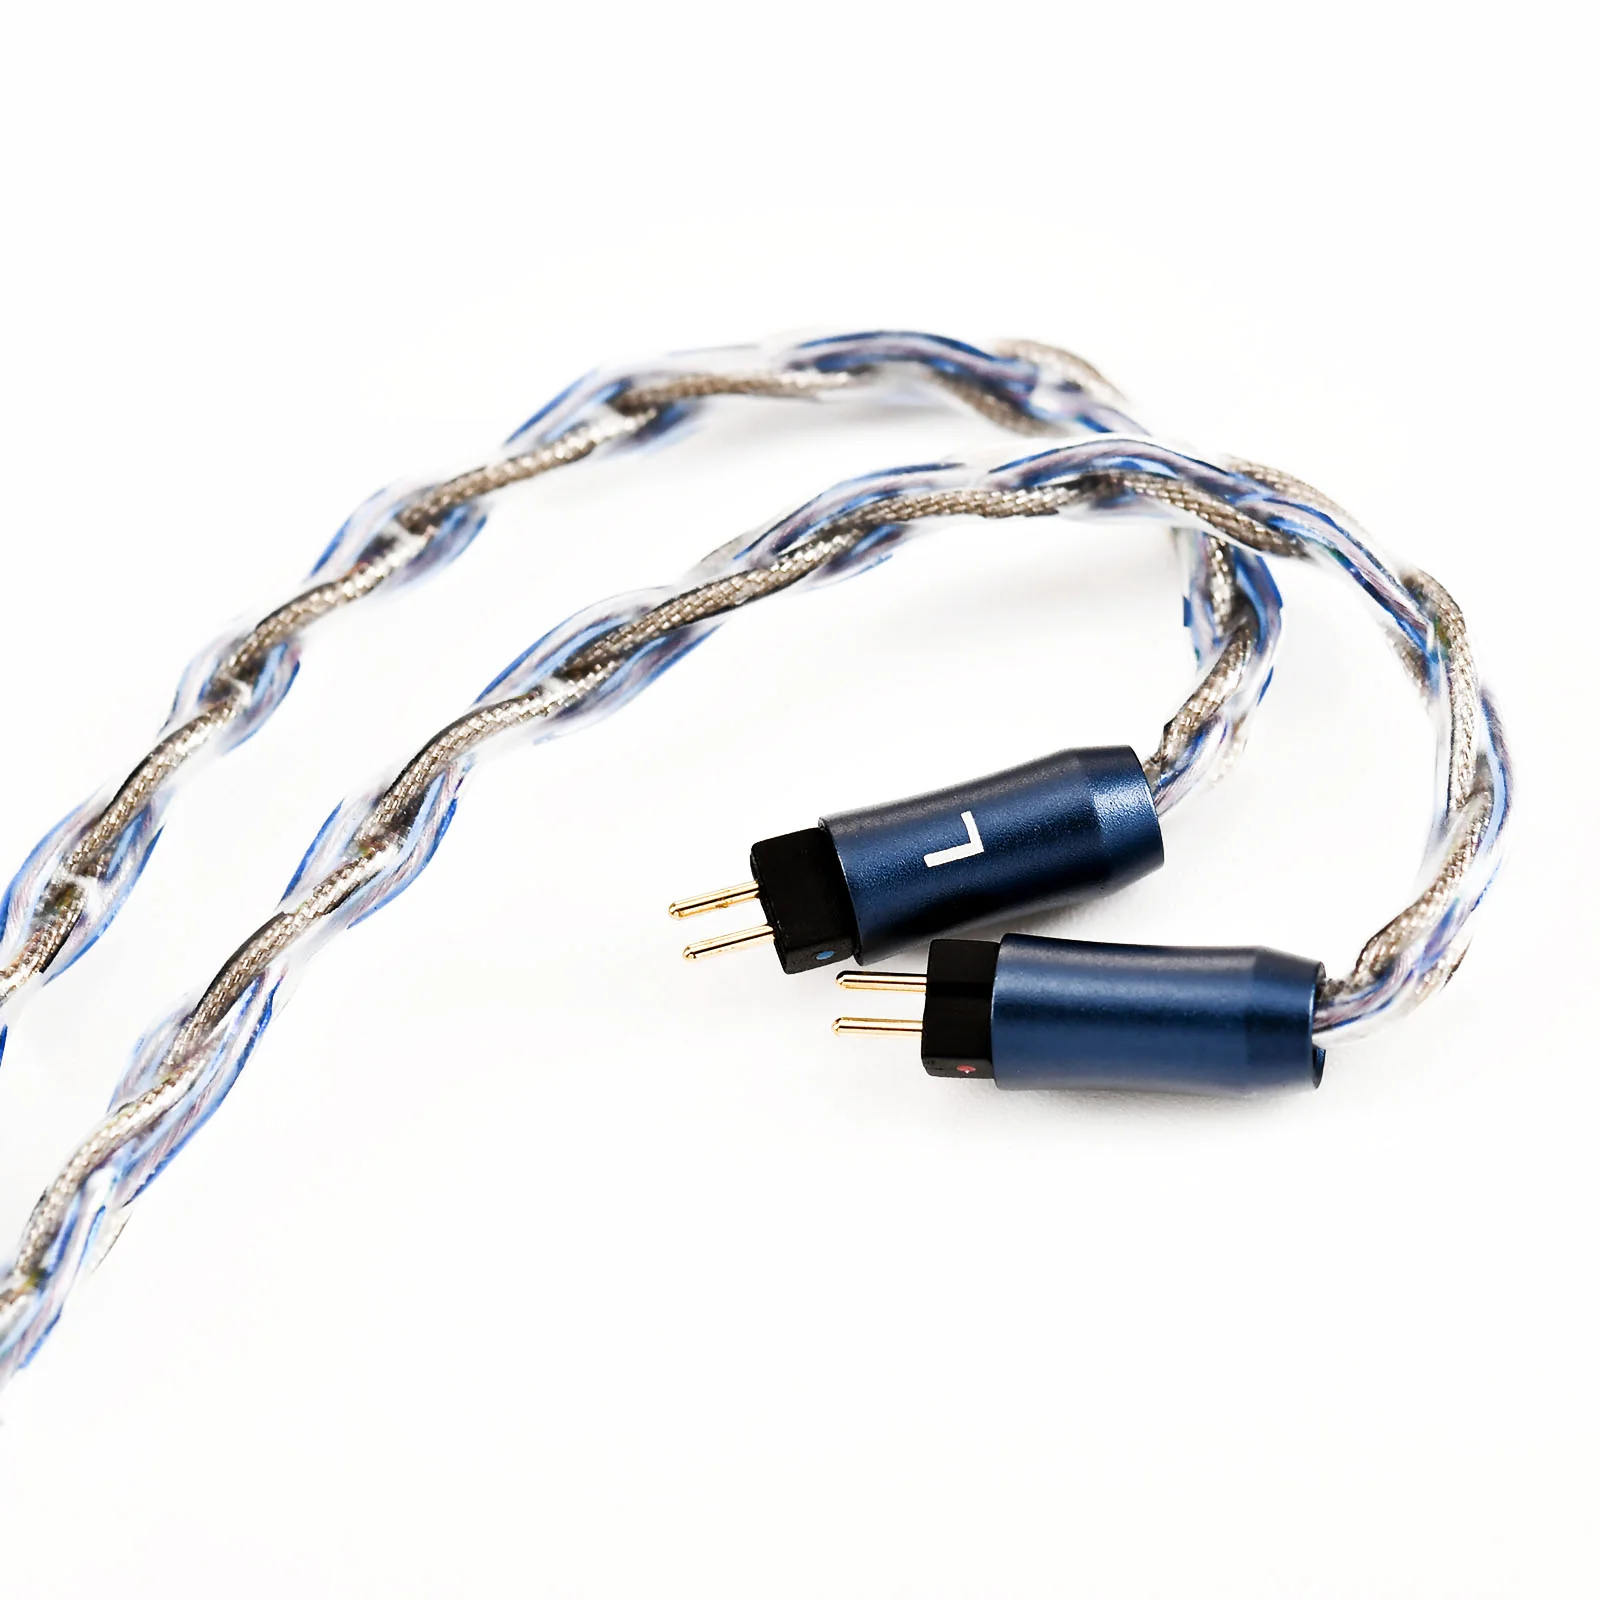 Kinera Ace 2.0 cable (2-pin) 178922